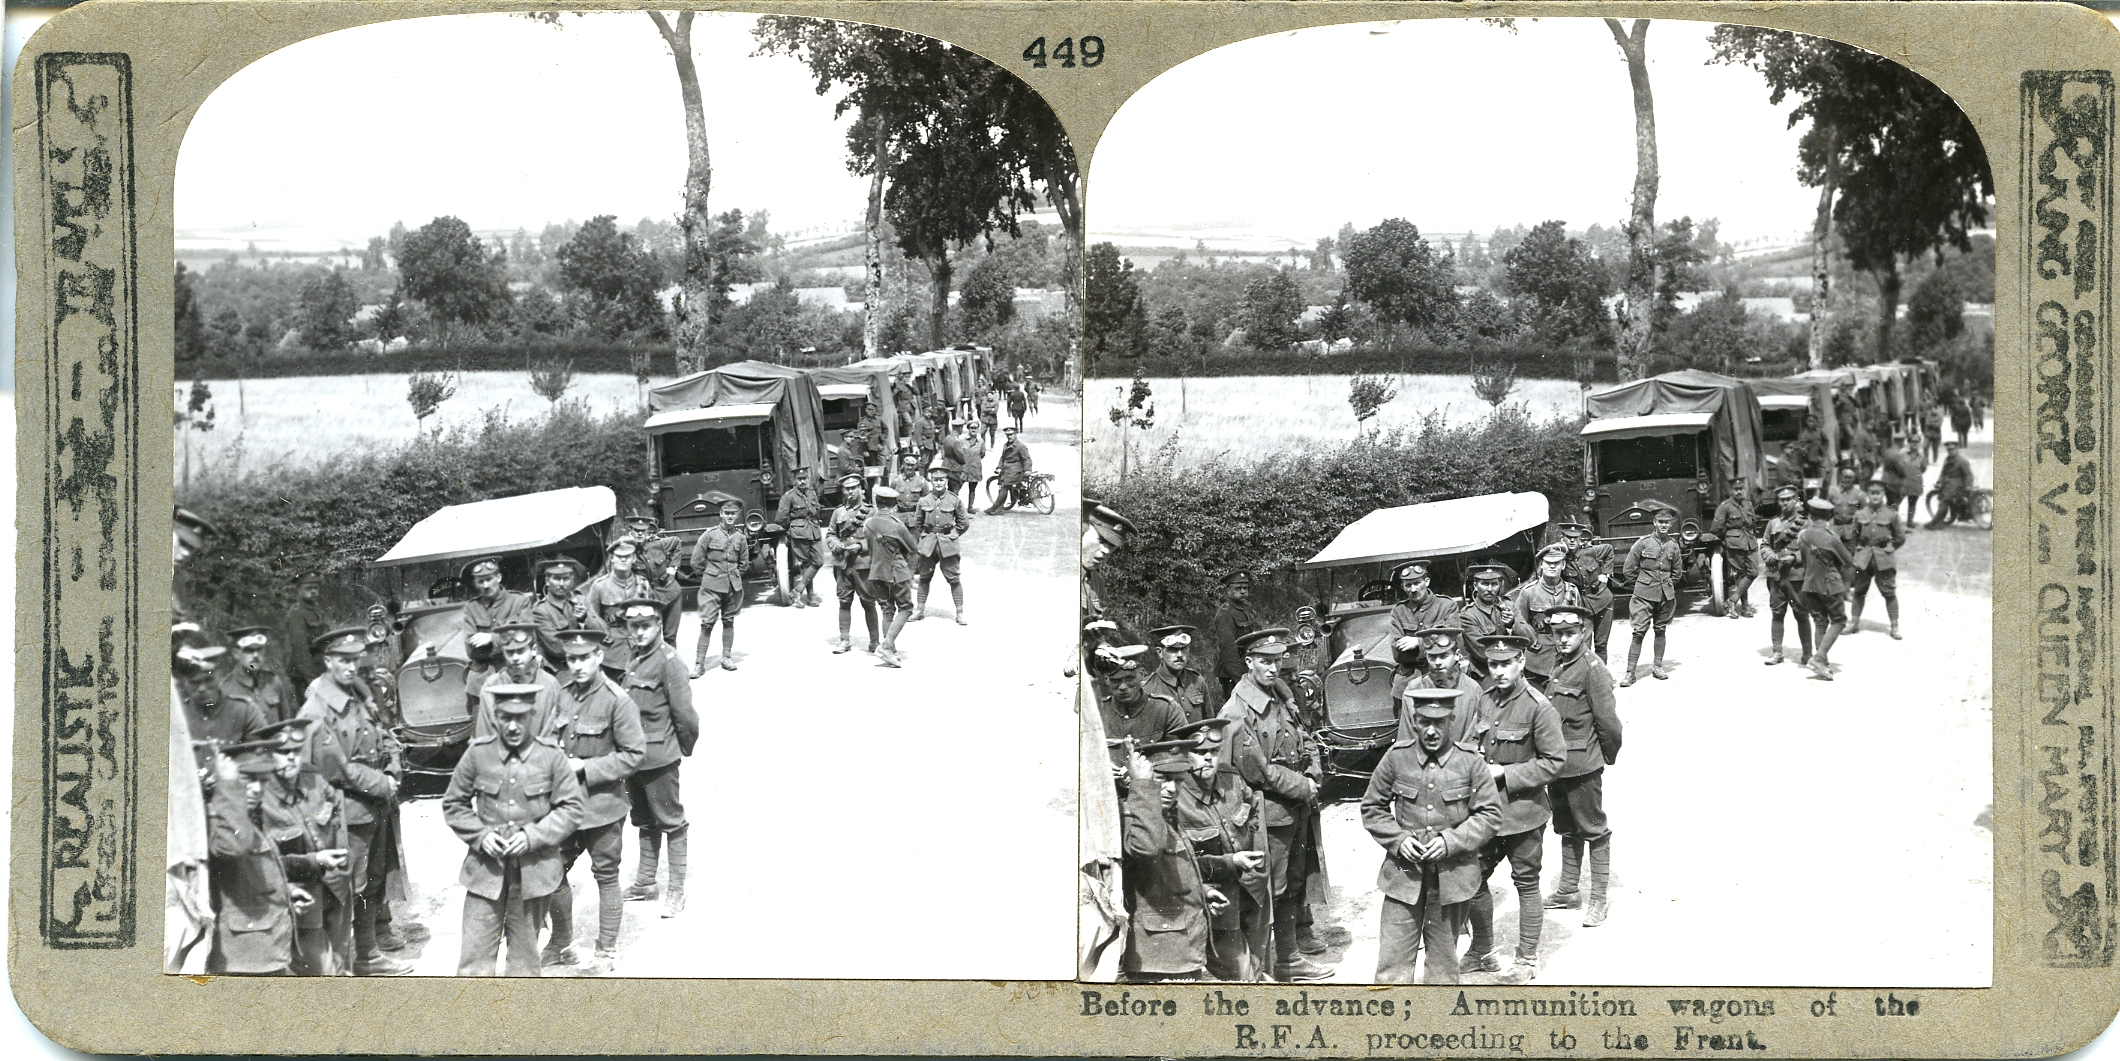 Before the advance; Ammunition wagons of the R.F.A. proceeding to the front